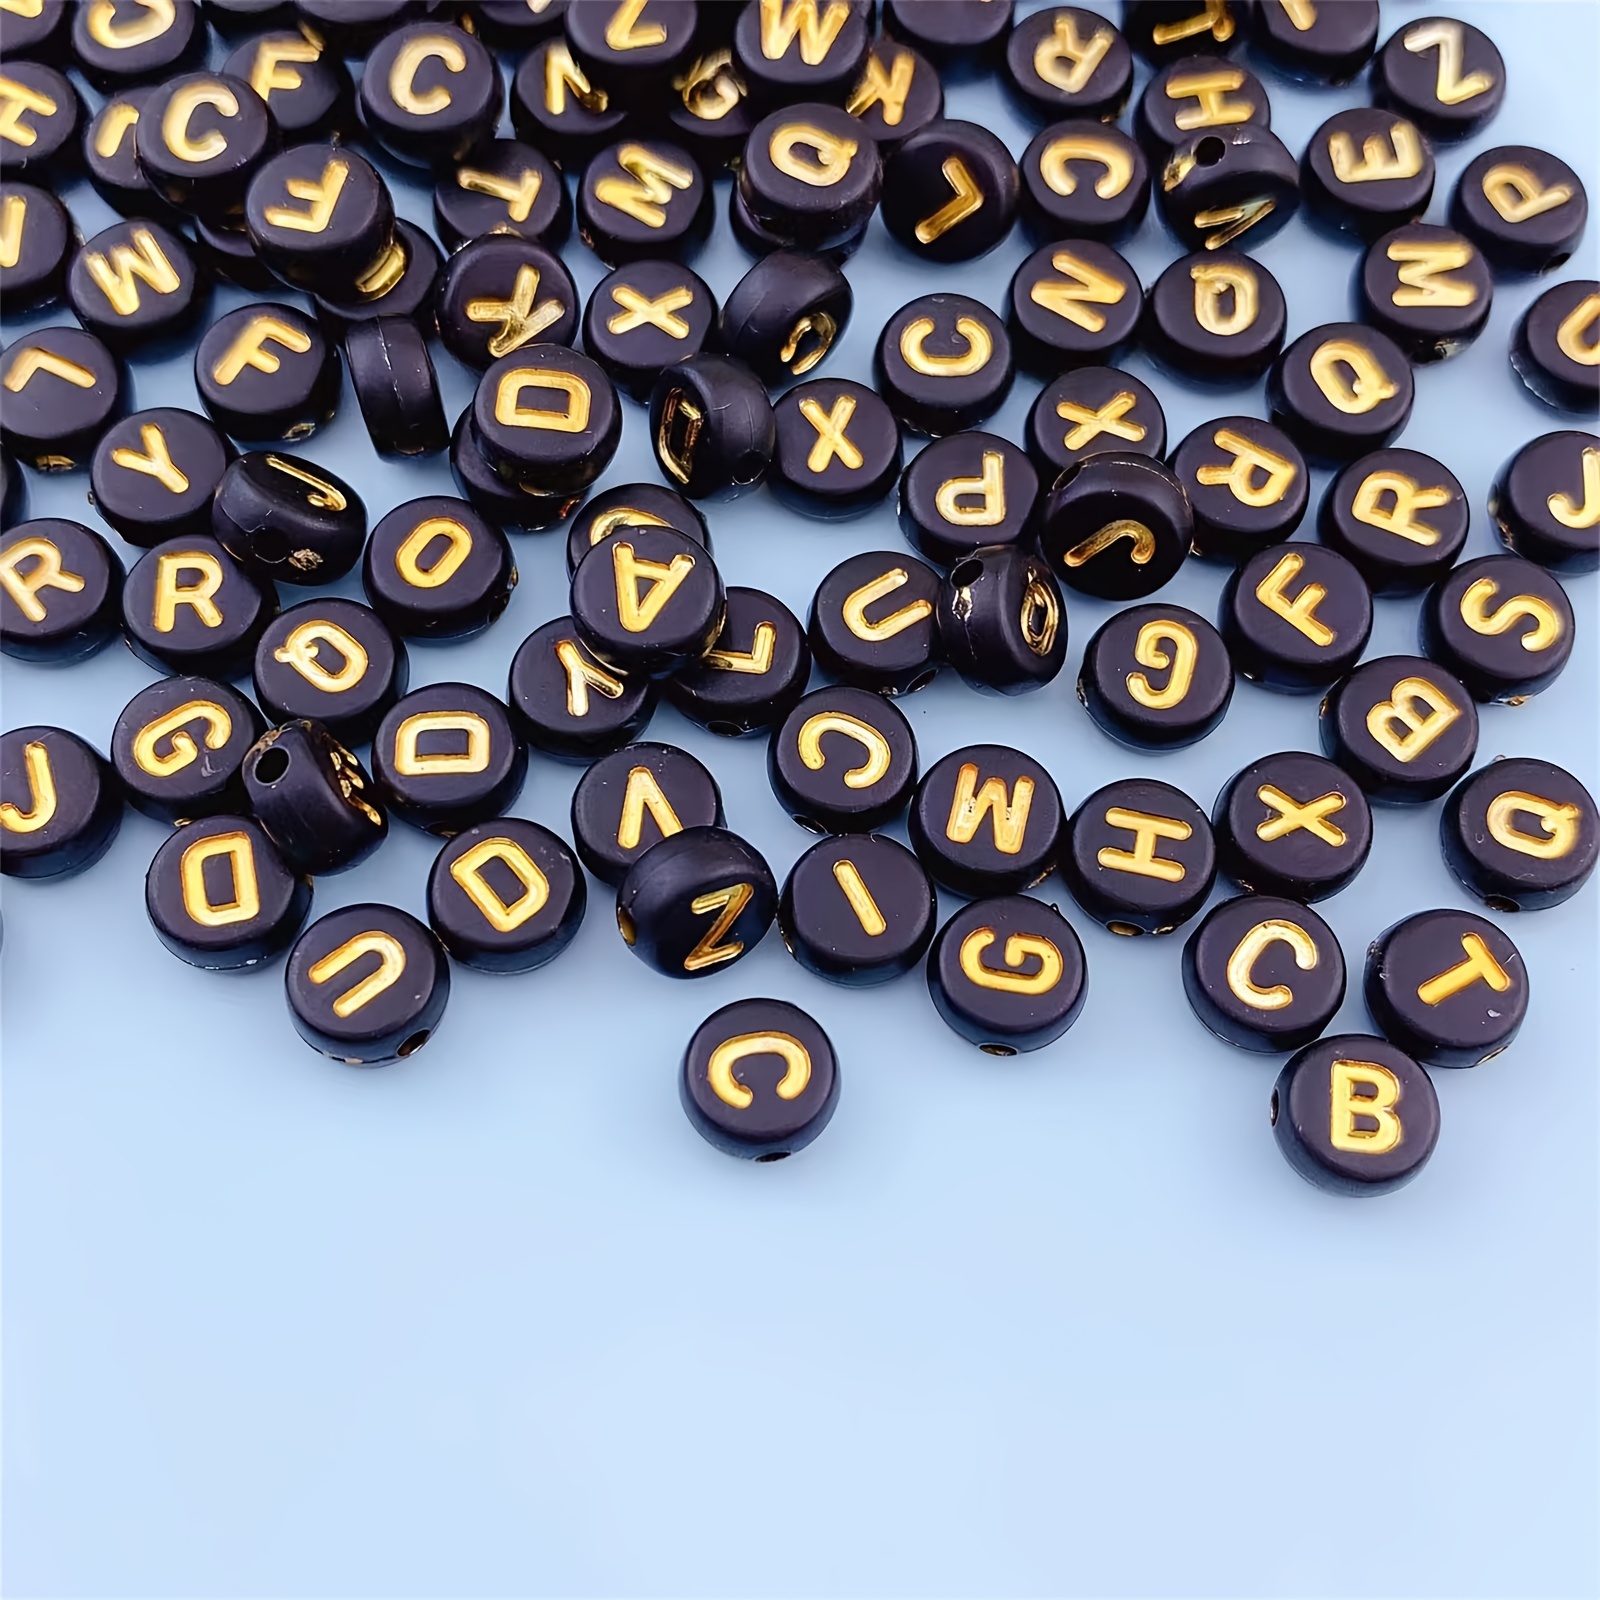 200 Pcs Letter Beads Alphabet Golden Letters Black Round Bead For  Friendship Bracelets And Gifts Souvenir Jewelry Making